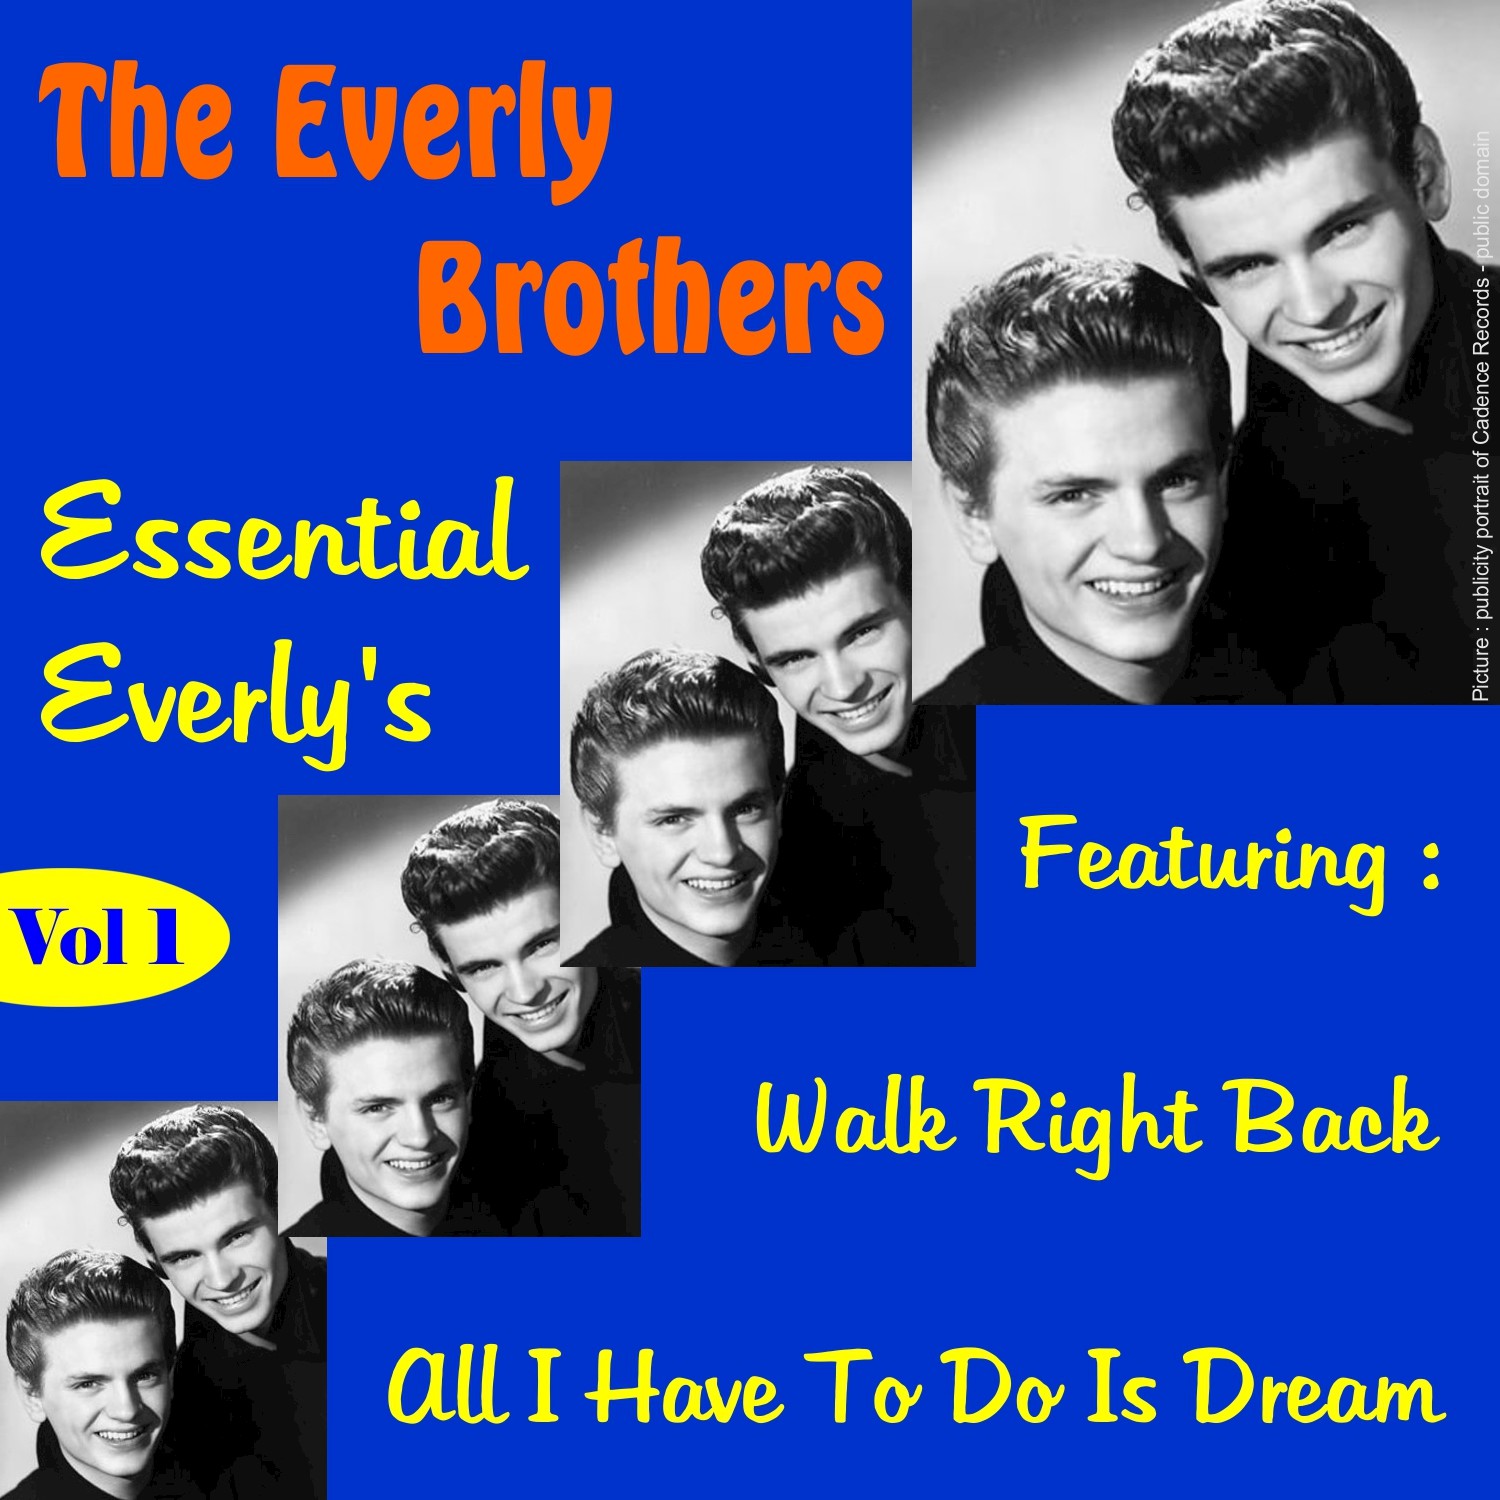 Essential Everly's, Vol. 1